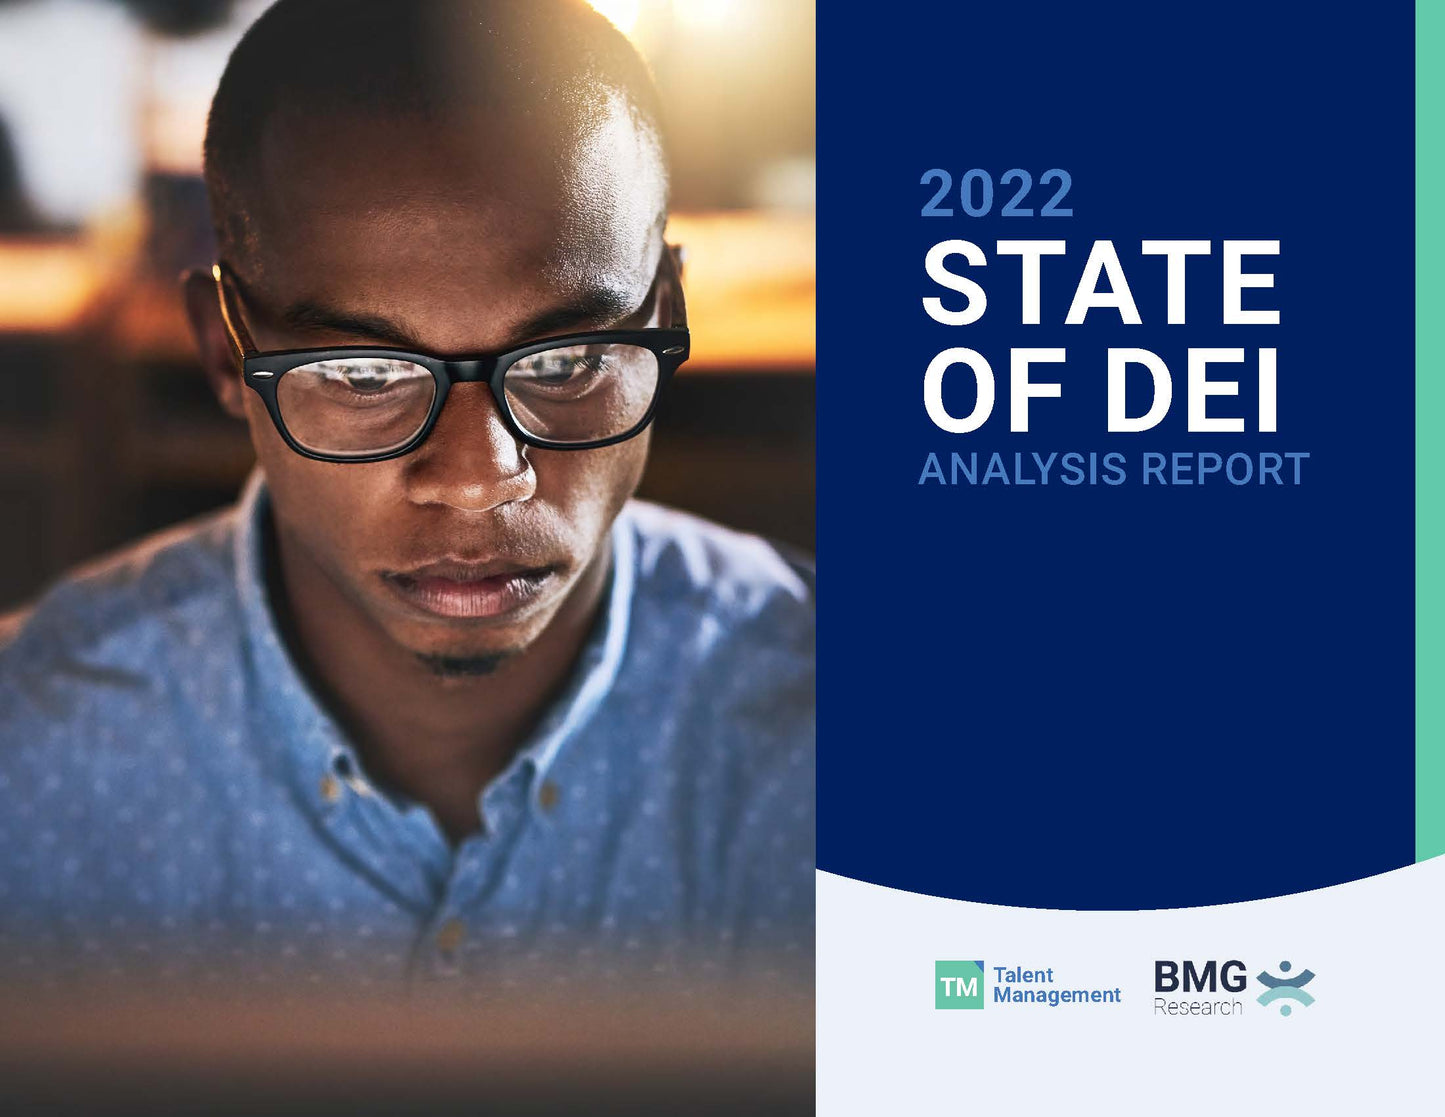 2022 State of DEI Report Bundle (Analysis Report & Benchmarks & Baselines Report)